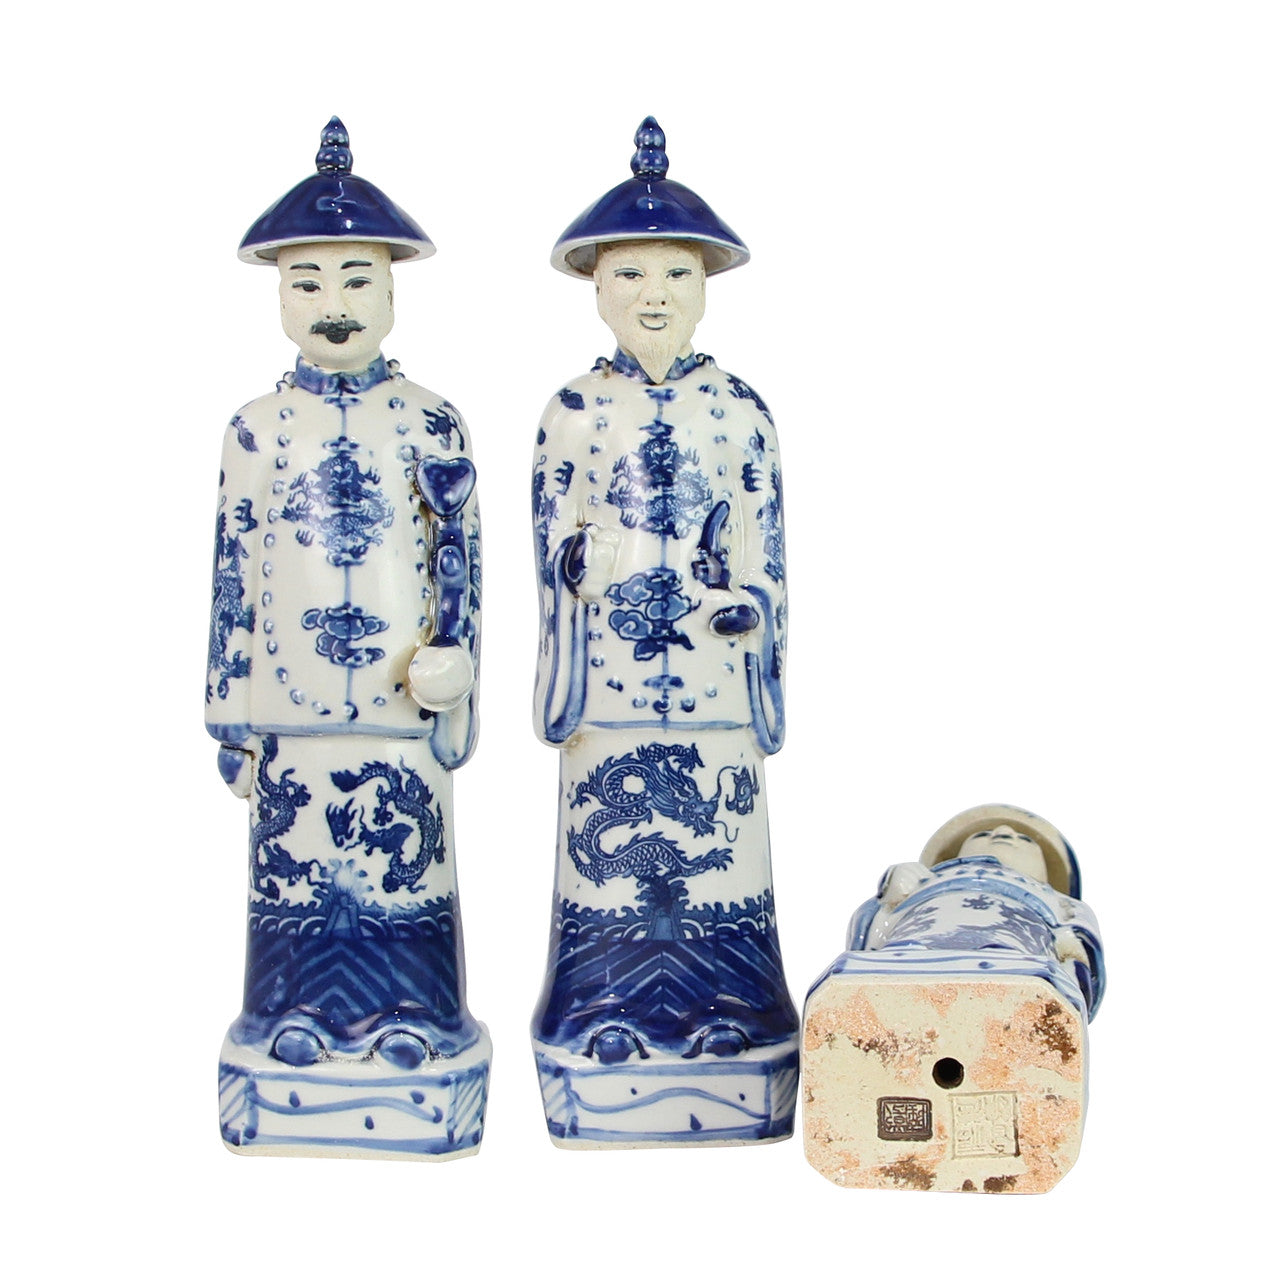 Blue and White Porcelain Chinese Qing 3 Generations Emperor Statue Figurine 11"